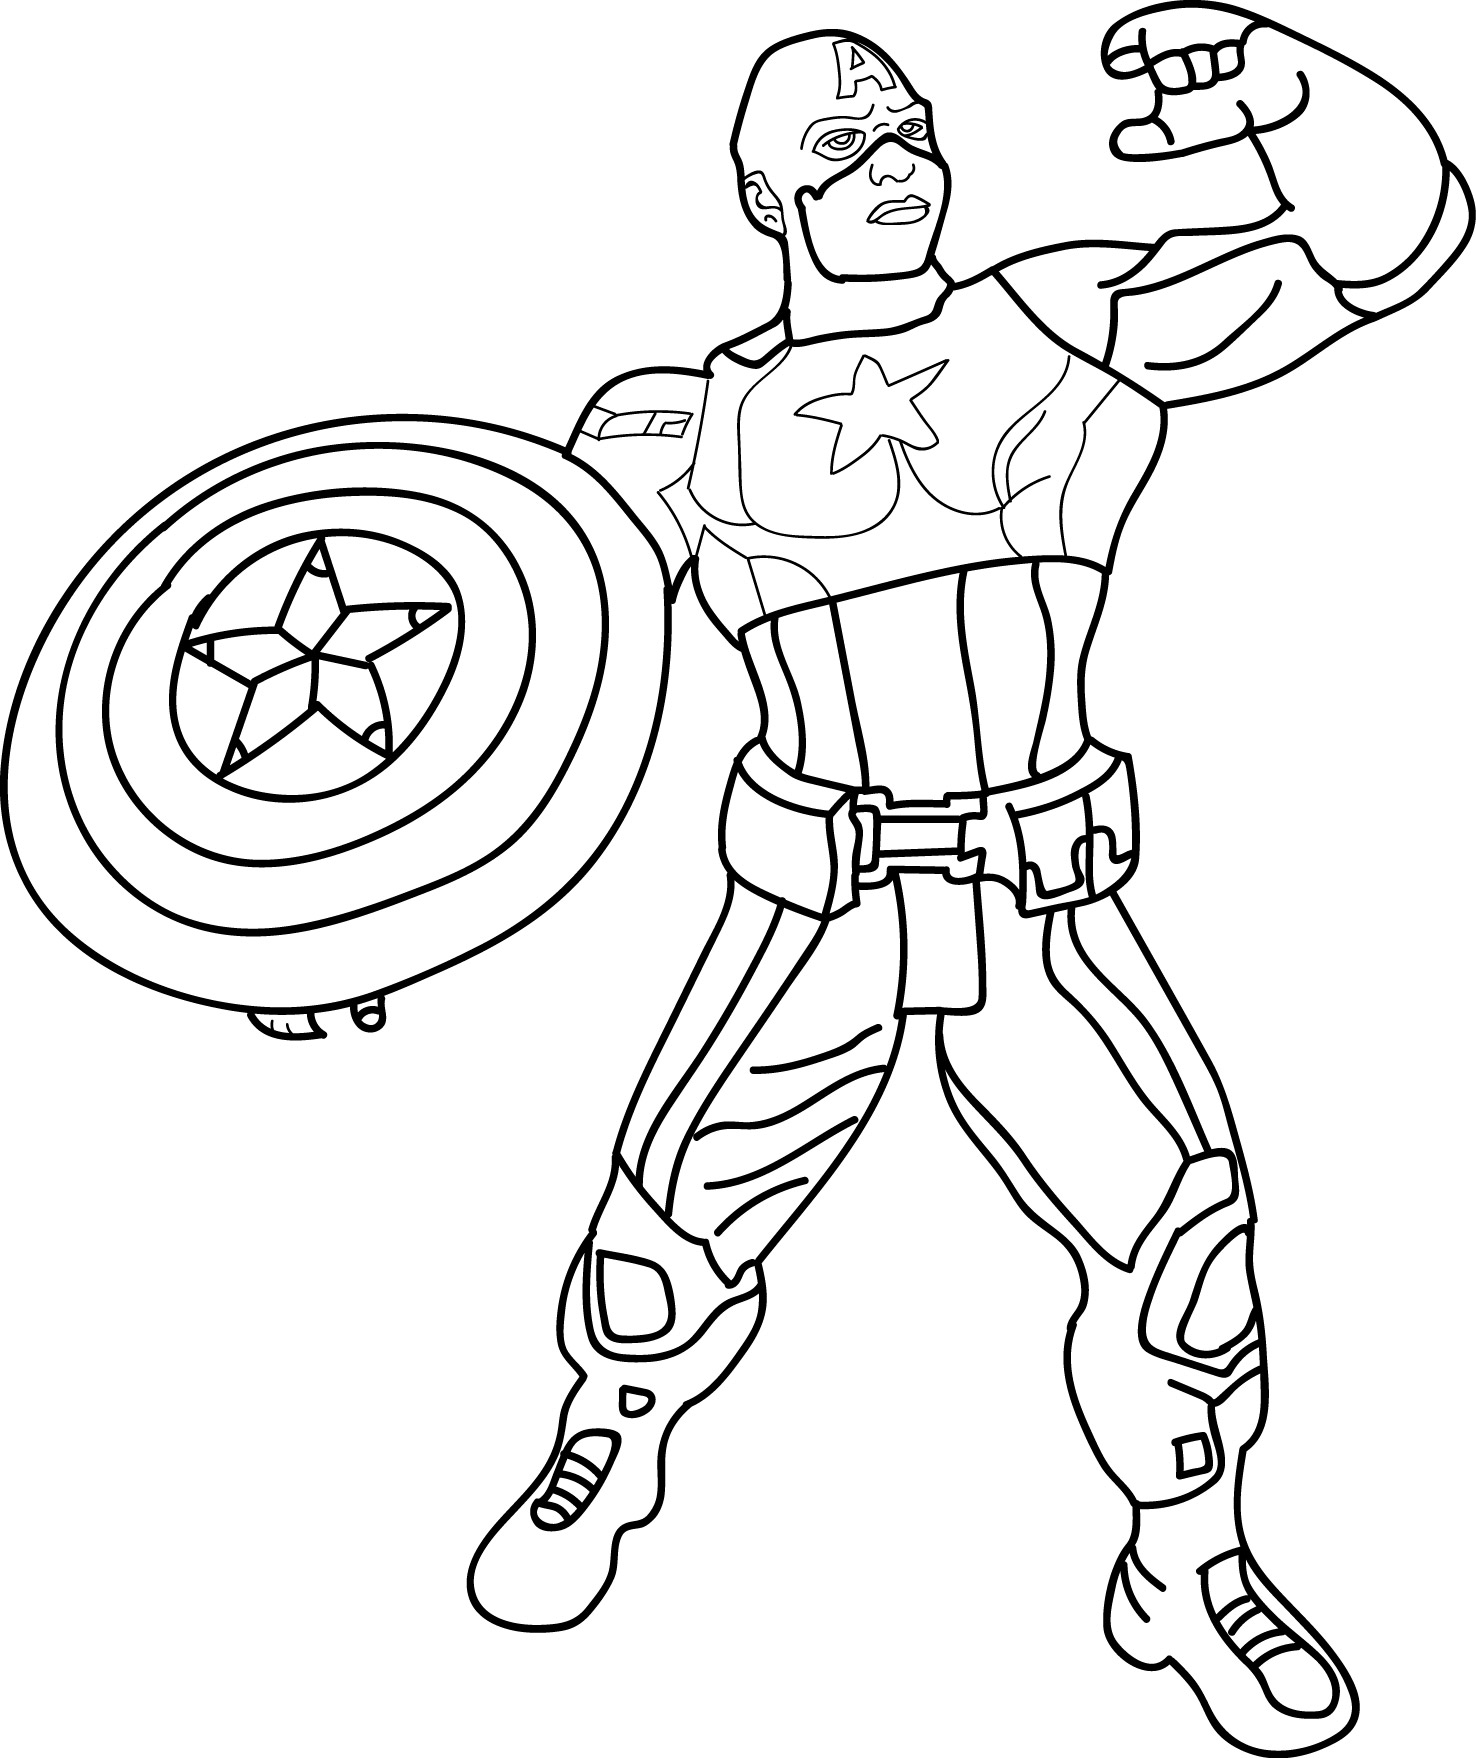 captain america colouring pictures coloring captain america coloring pictures colouring america captain pictures 